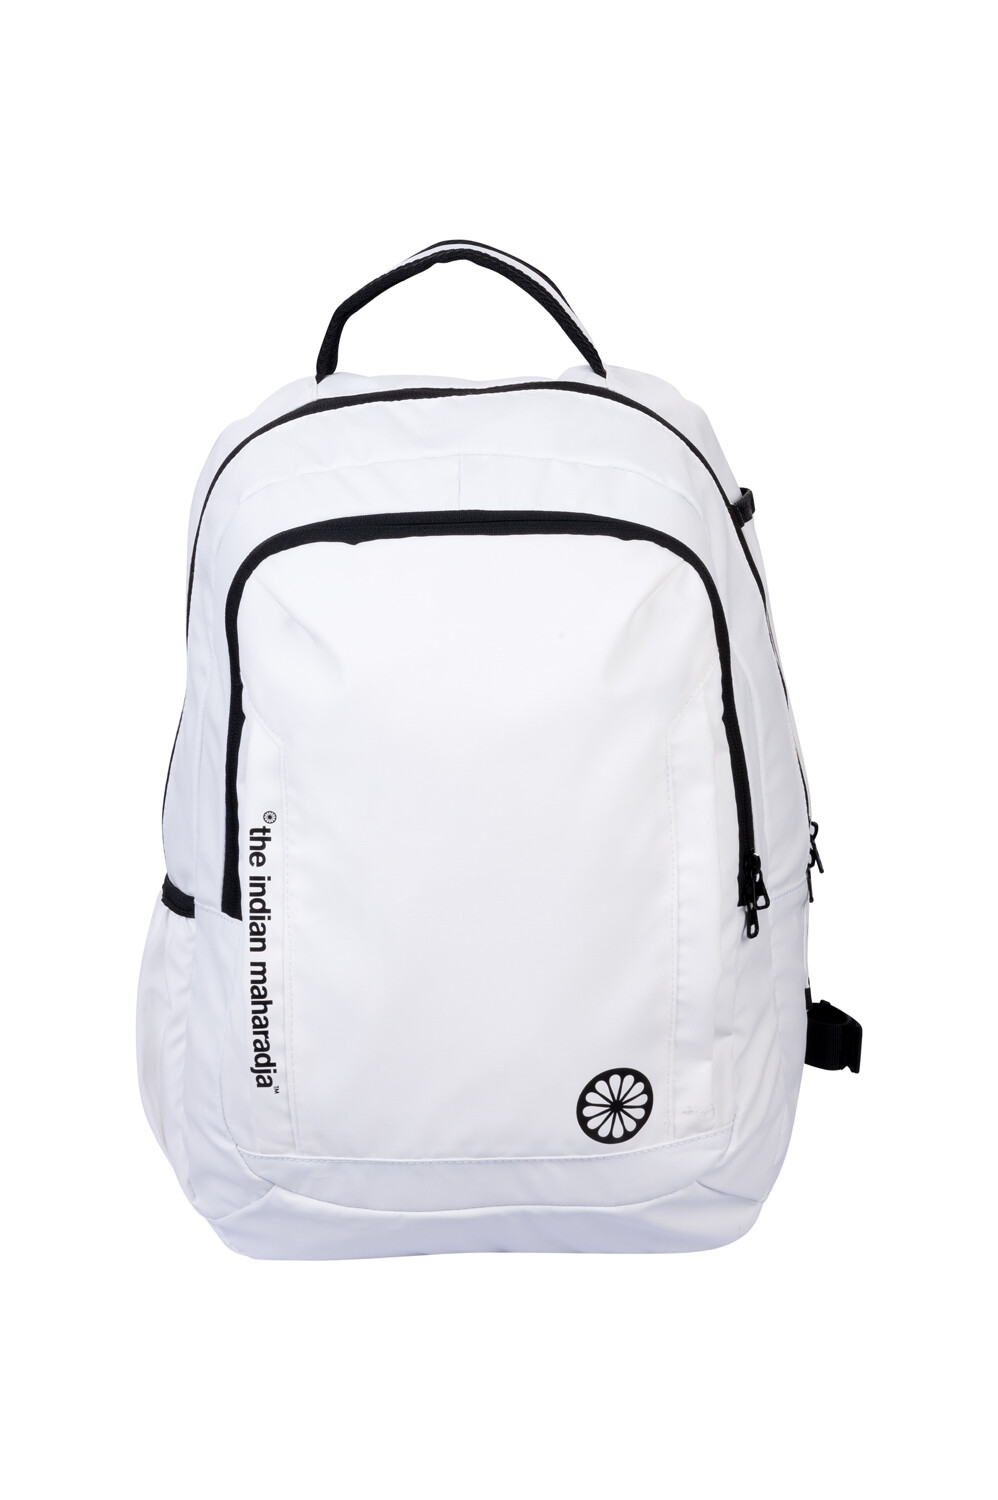 Backpack PMC LE- white Color white  Size 33x20x50cm (± 33 ltr)